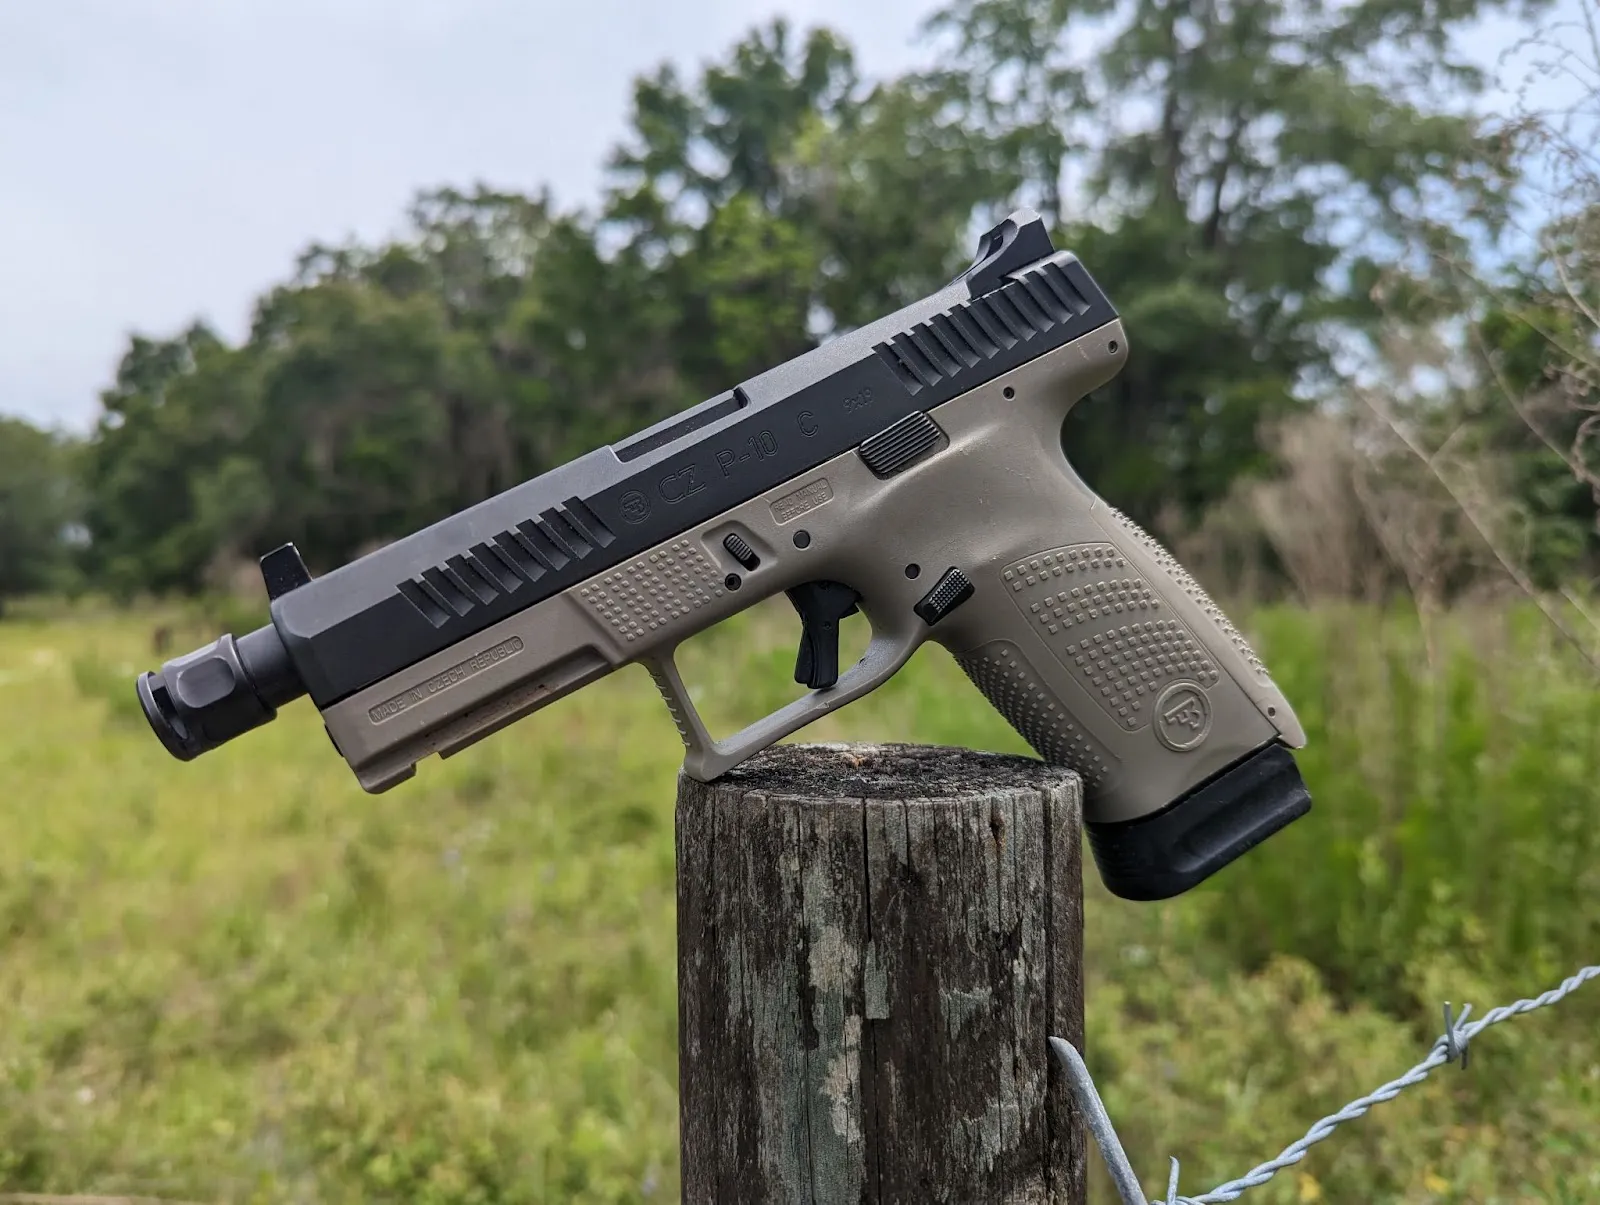 Cz p10c side photo with land background